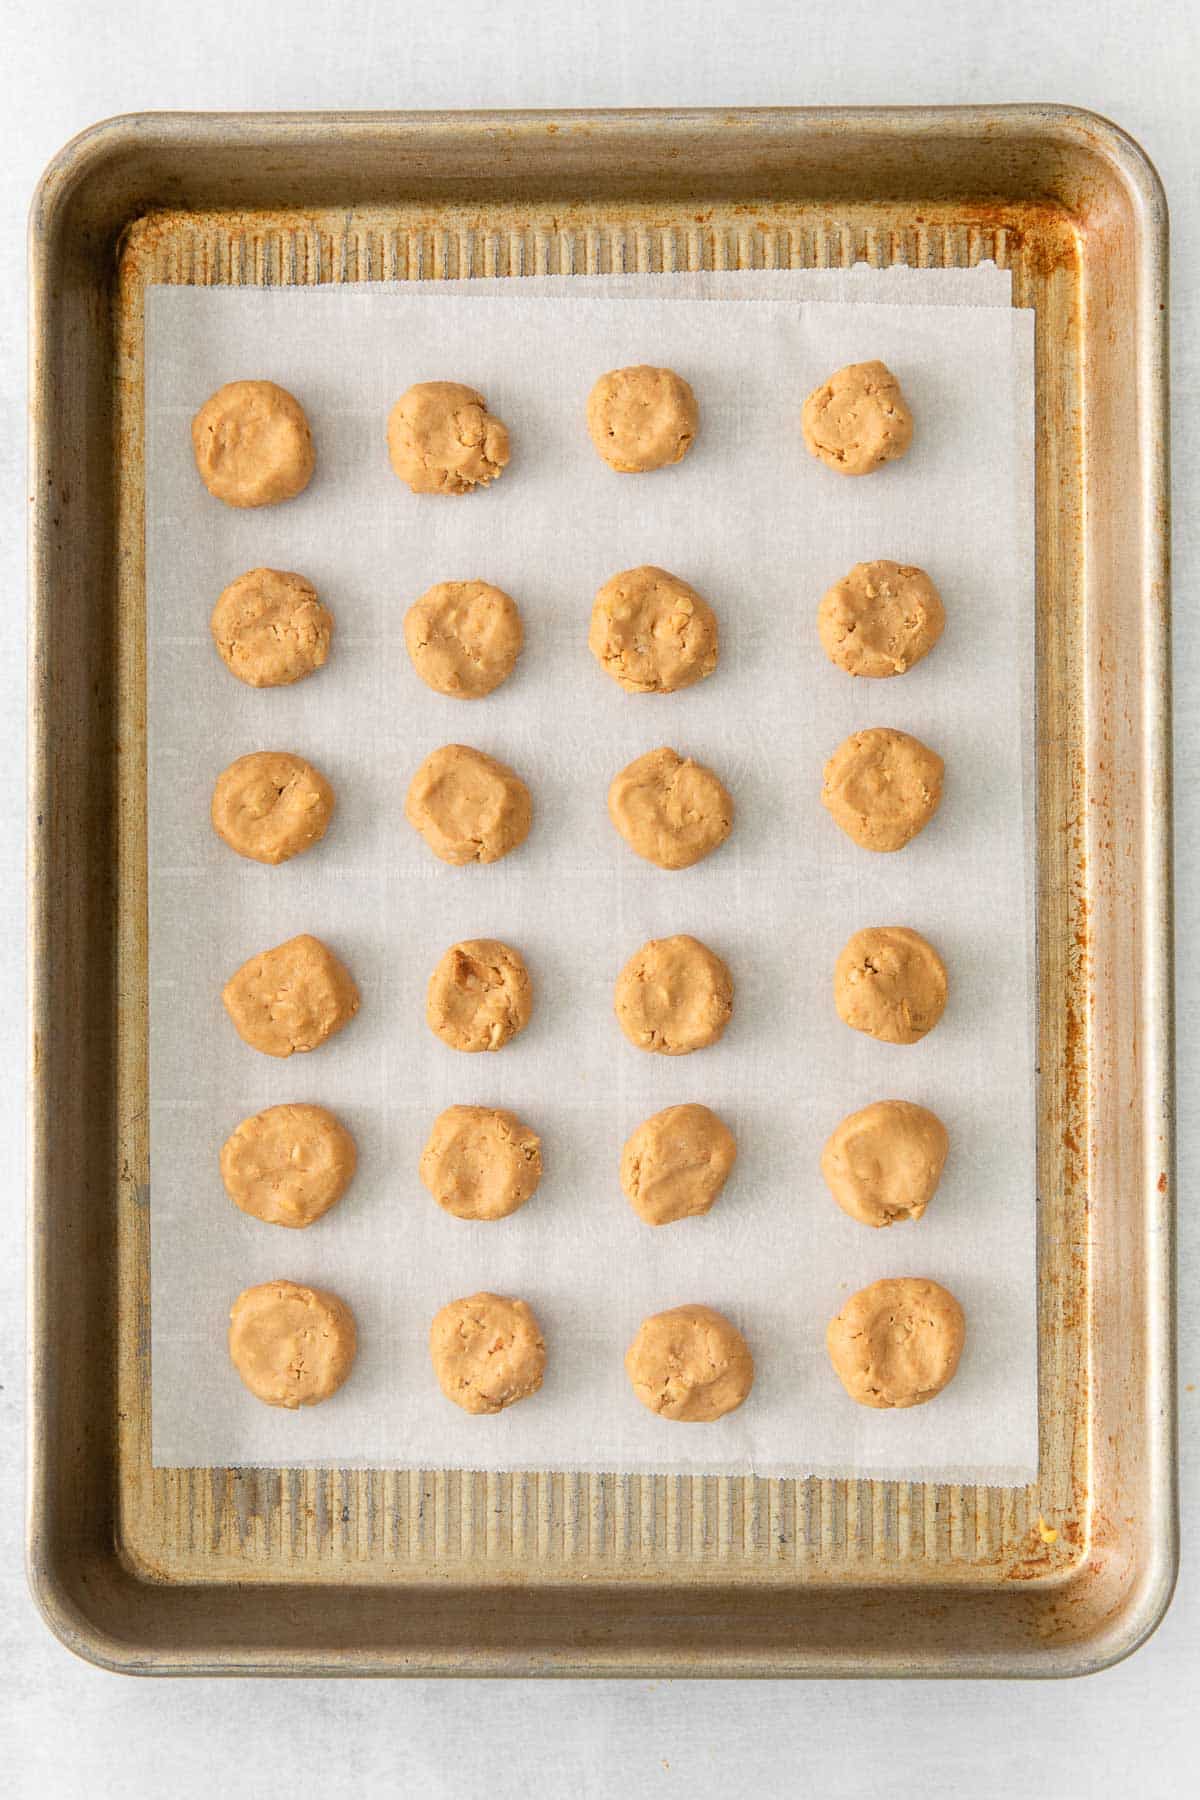 24 peanut butter dough discs lined on a parchment lined baking sheet.